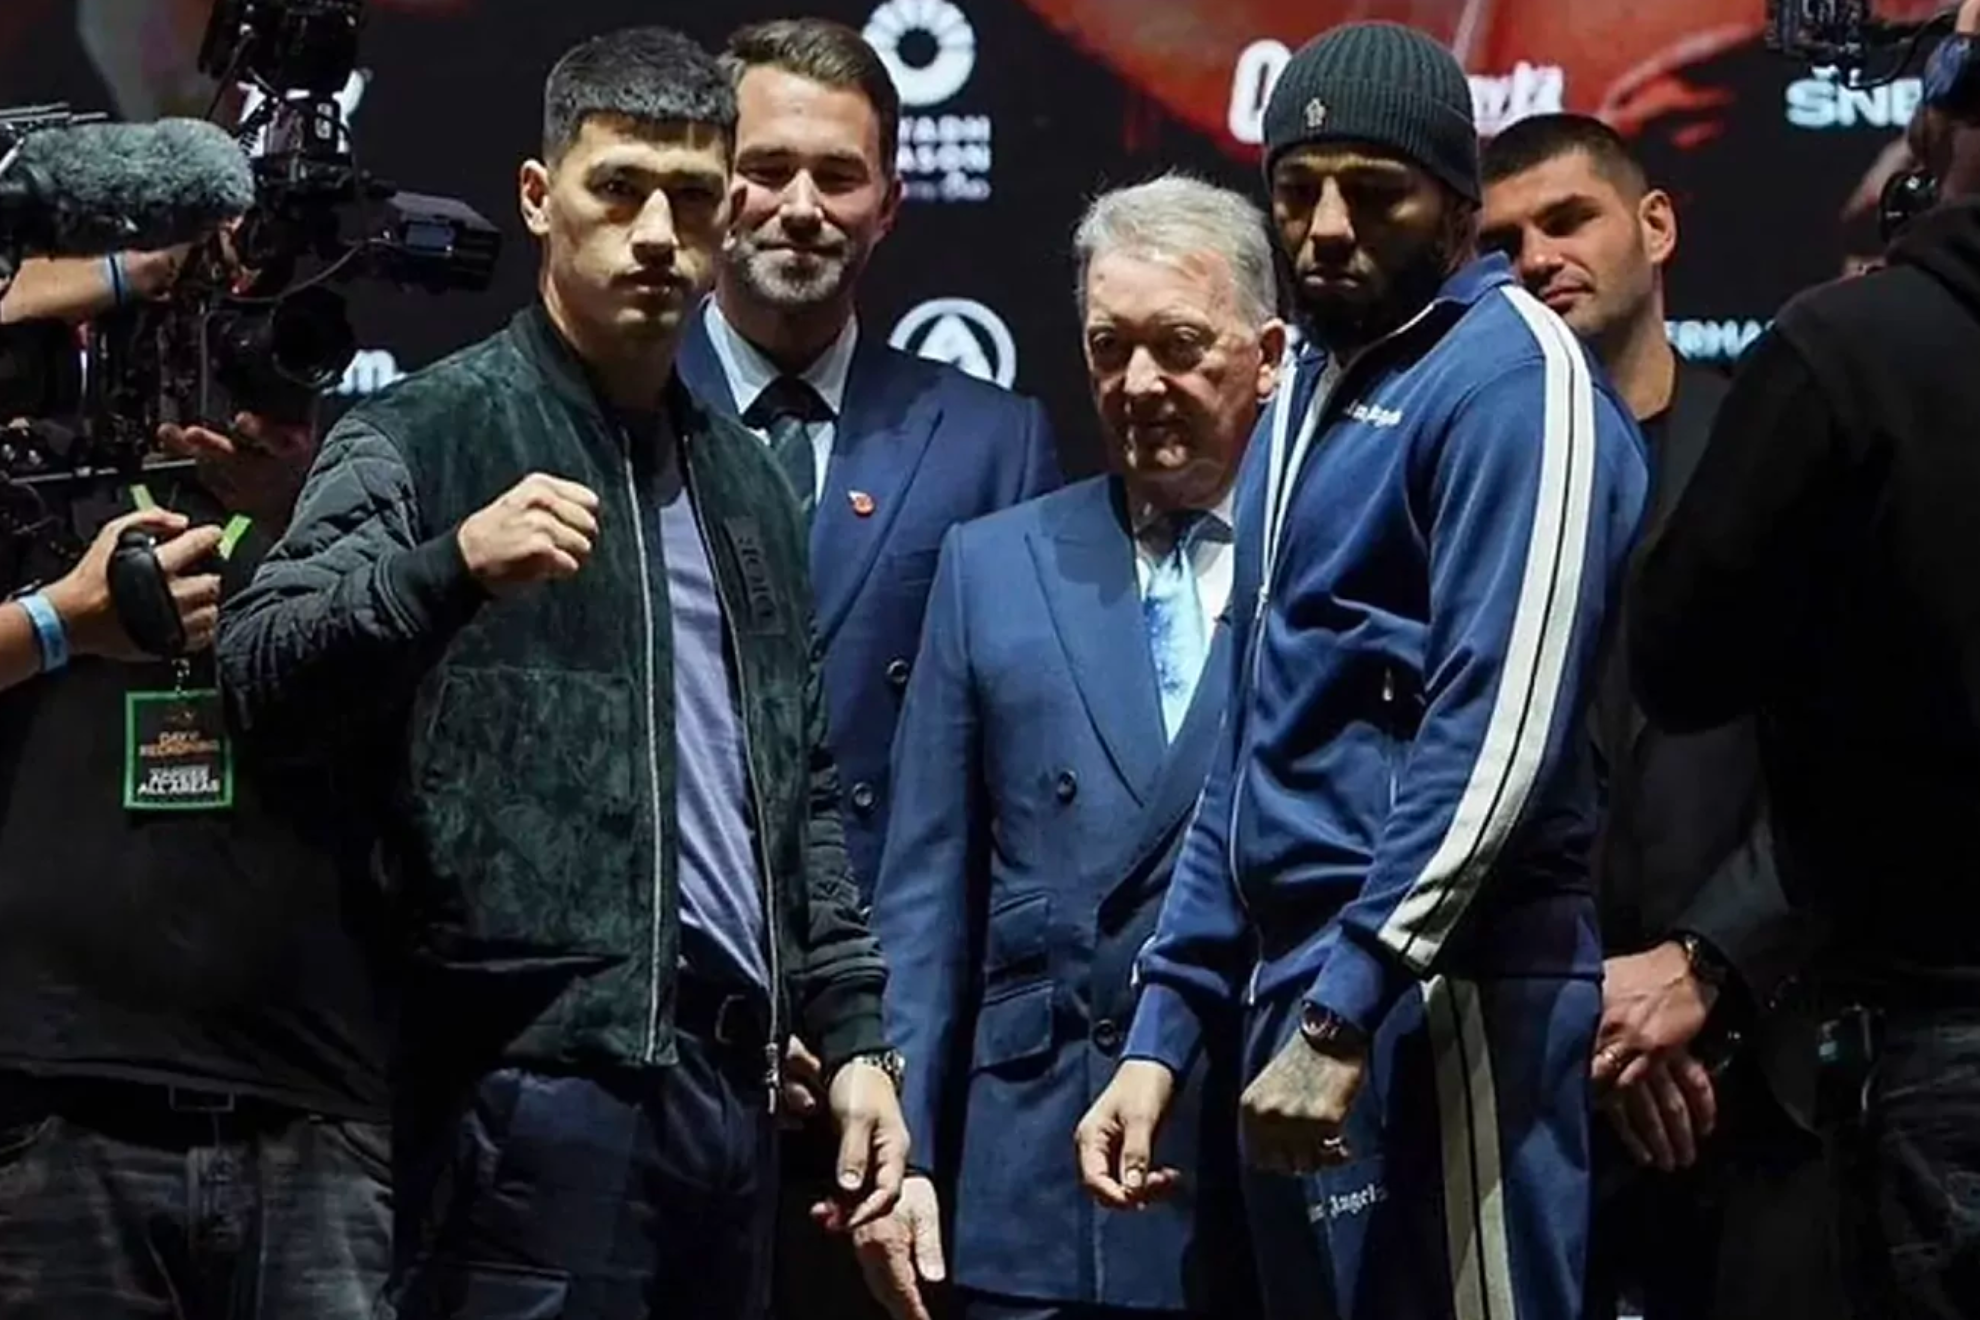 Dmitry Bivol vs Lyndon Arthur Stats: Height, weight, winnings and losses for both fighters